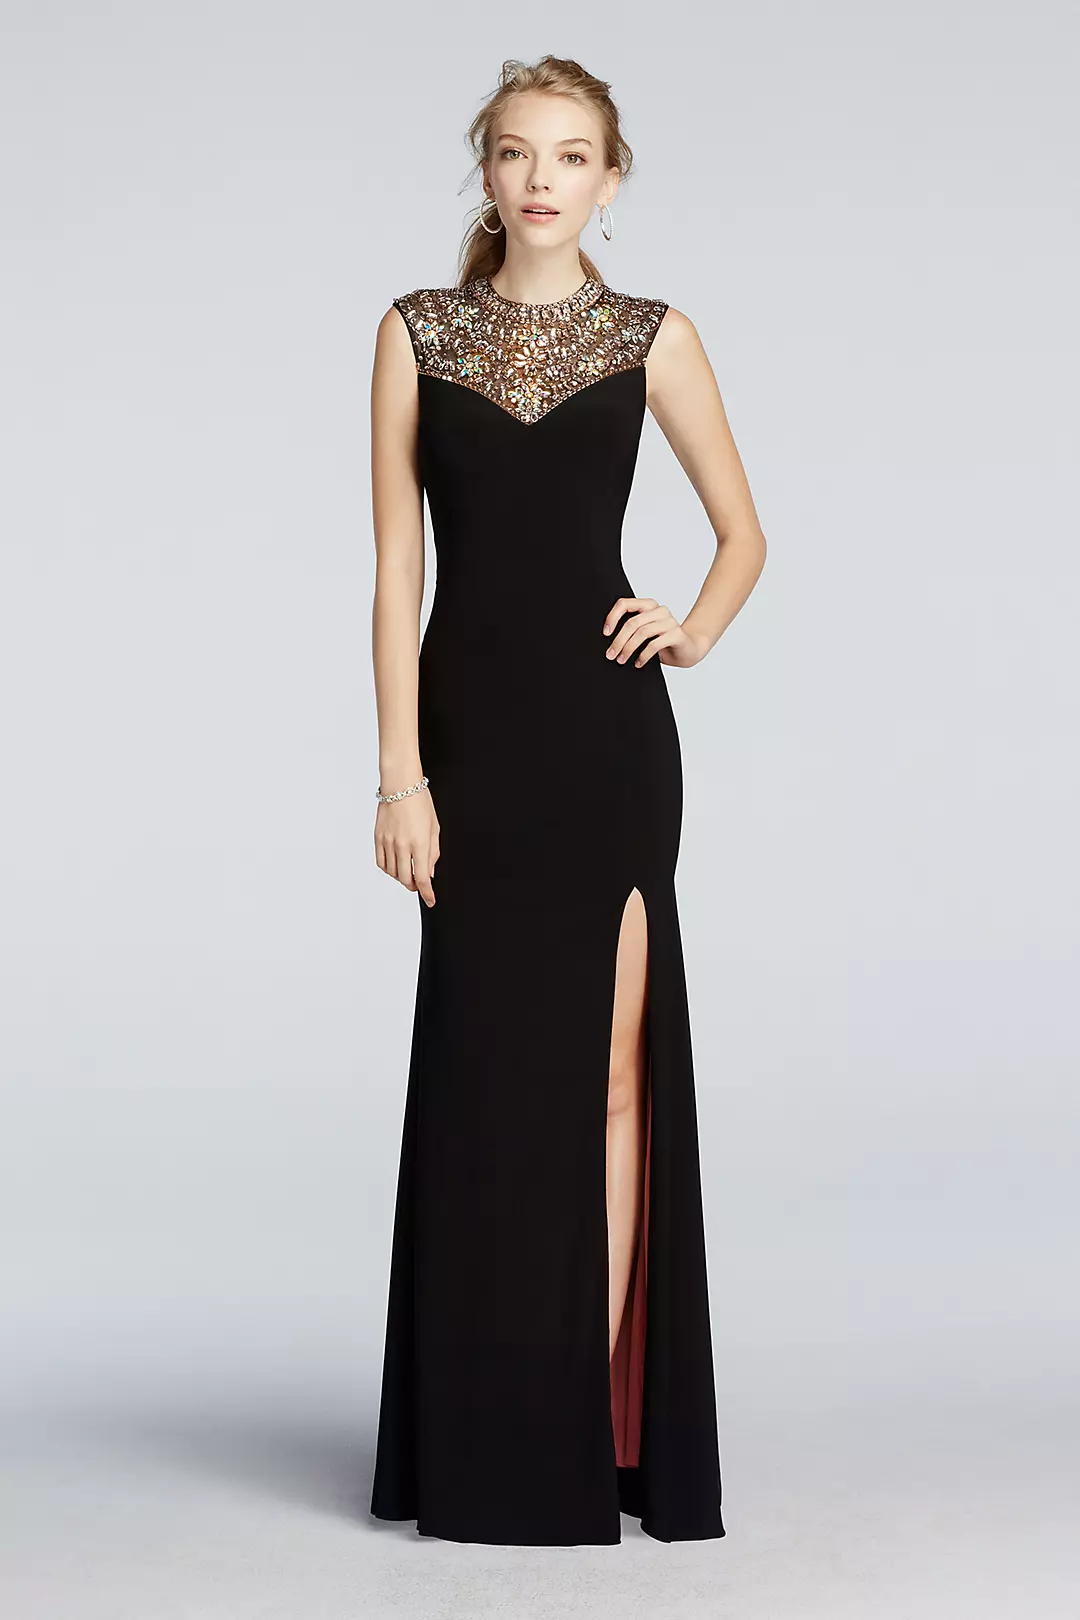 Beaded High Neck Tank Prom Dress with Side Slit Image